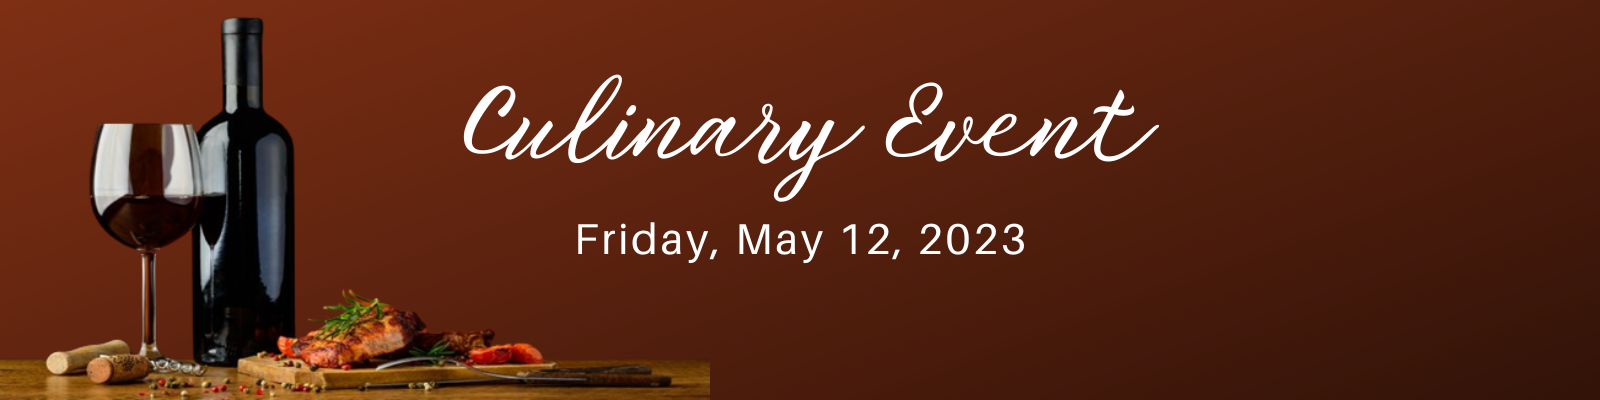 Culinary Event - Friday May 12, 2023 6:30pm – 10:30pm